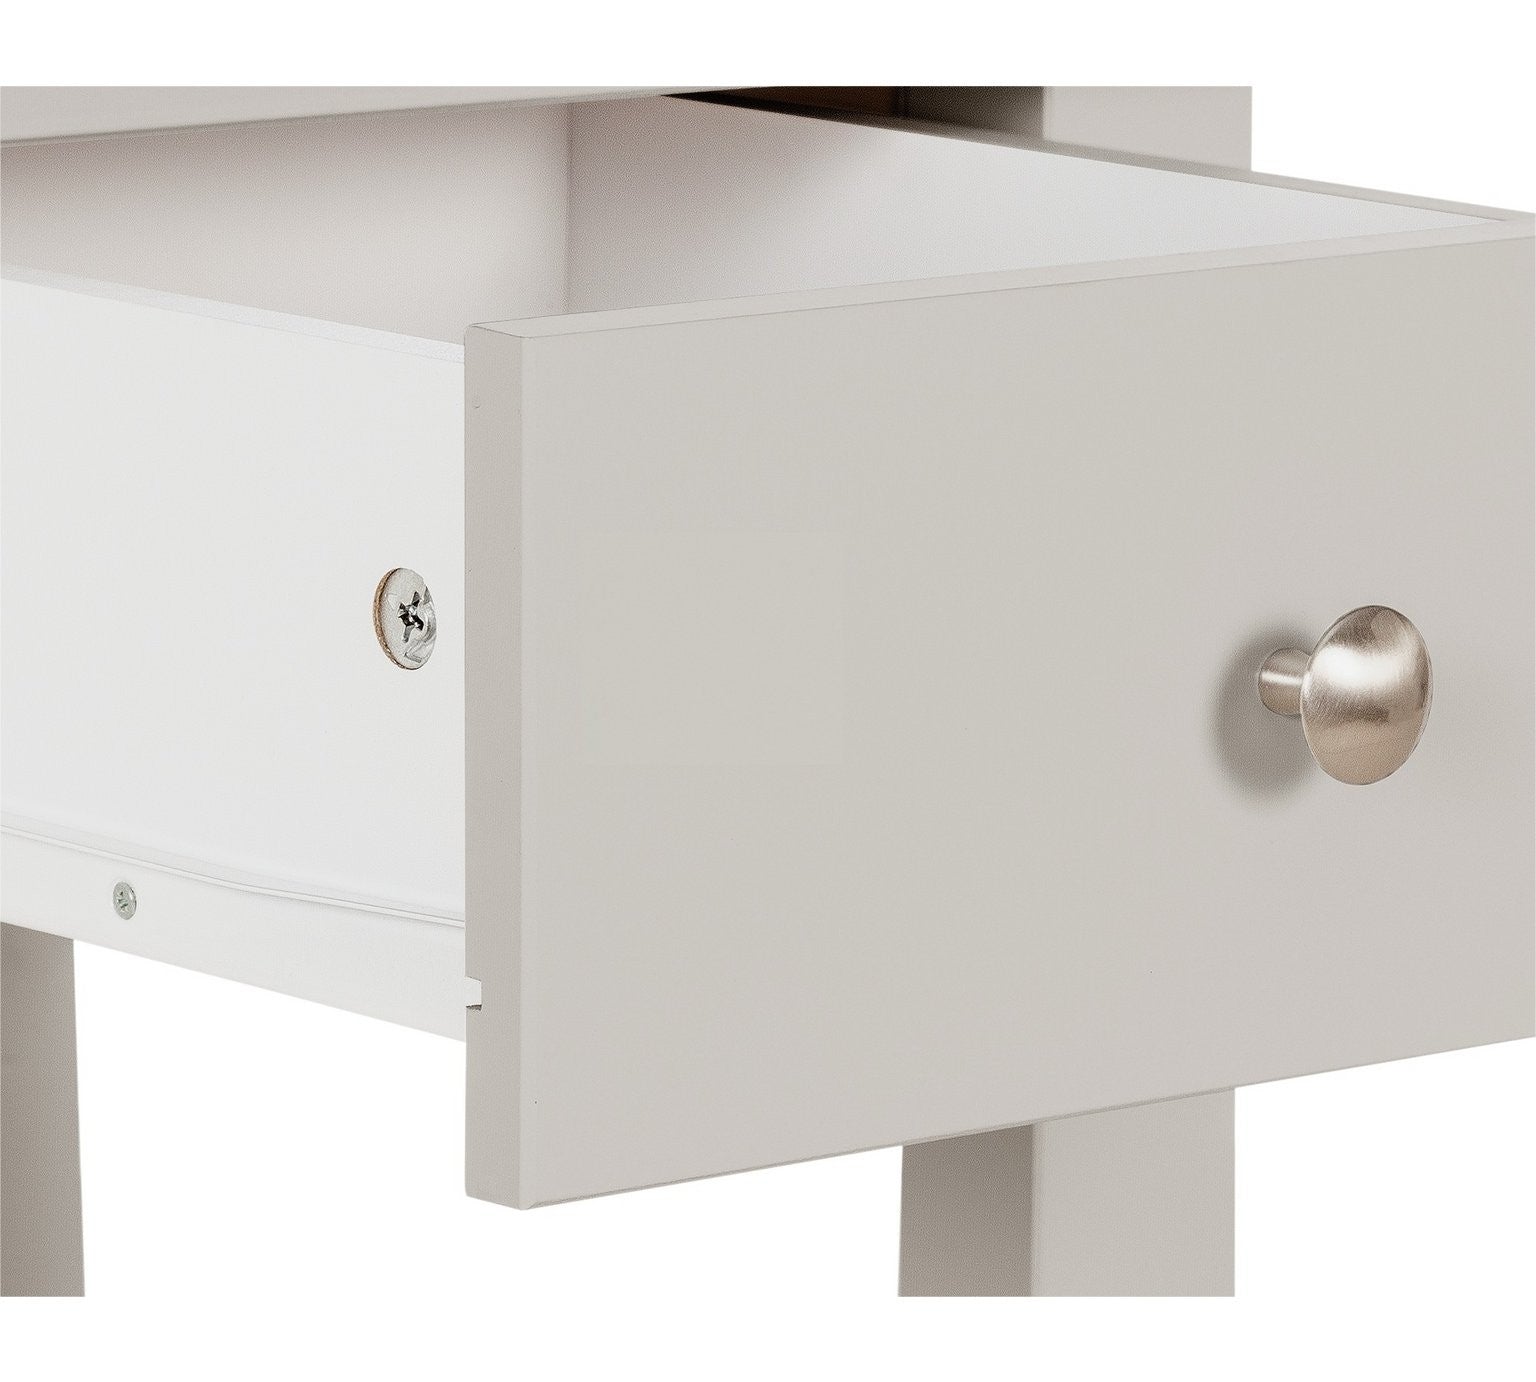 Florence 3 drawer Dressing Table in White